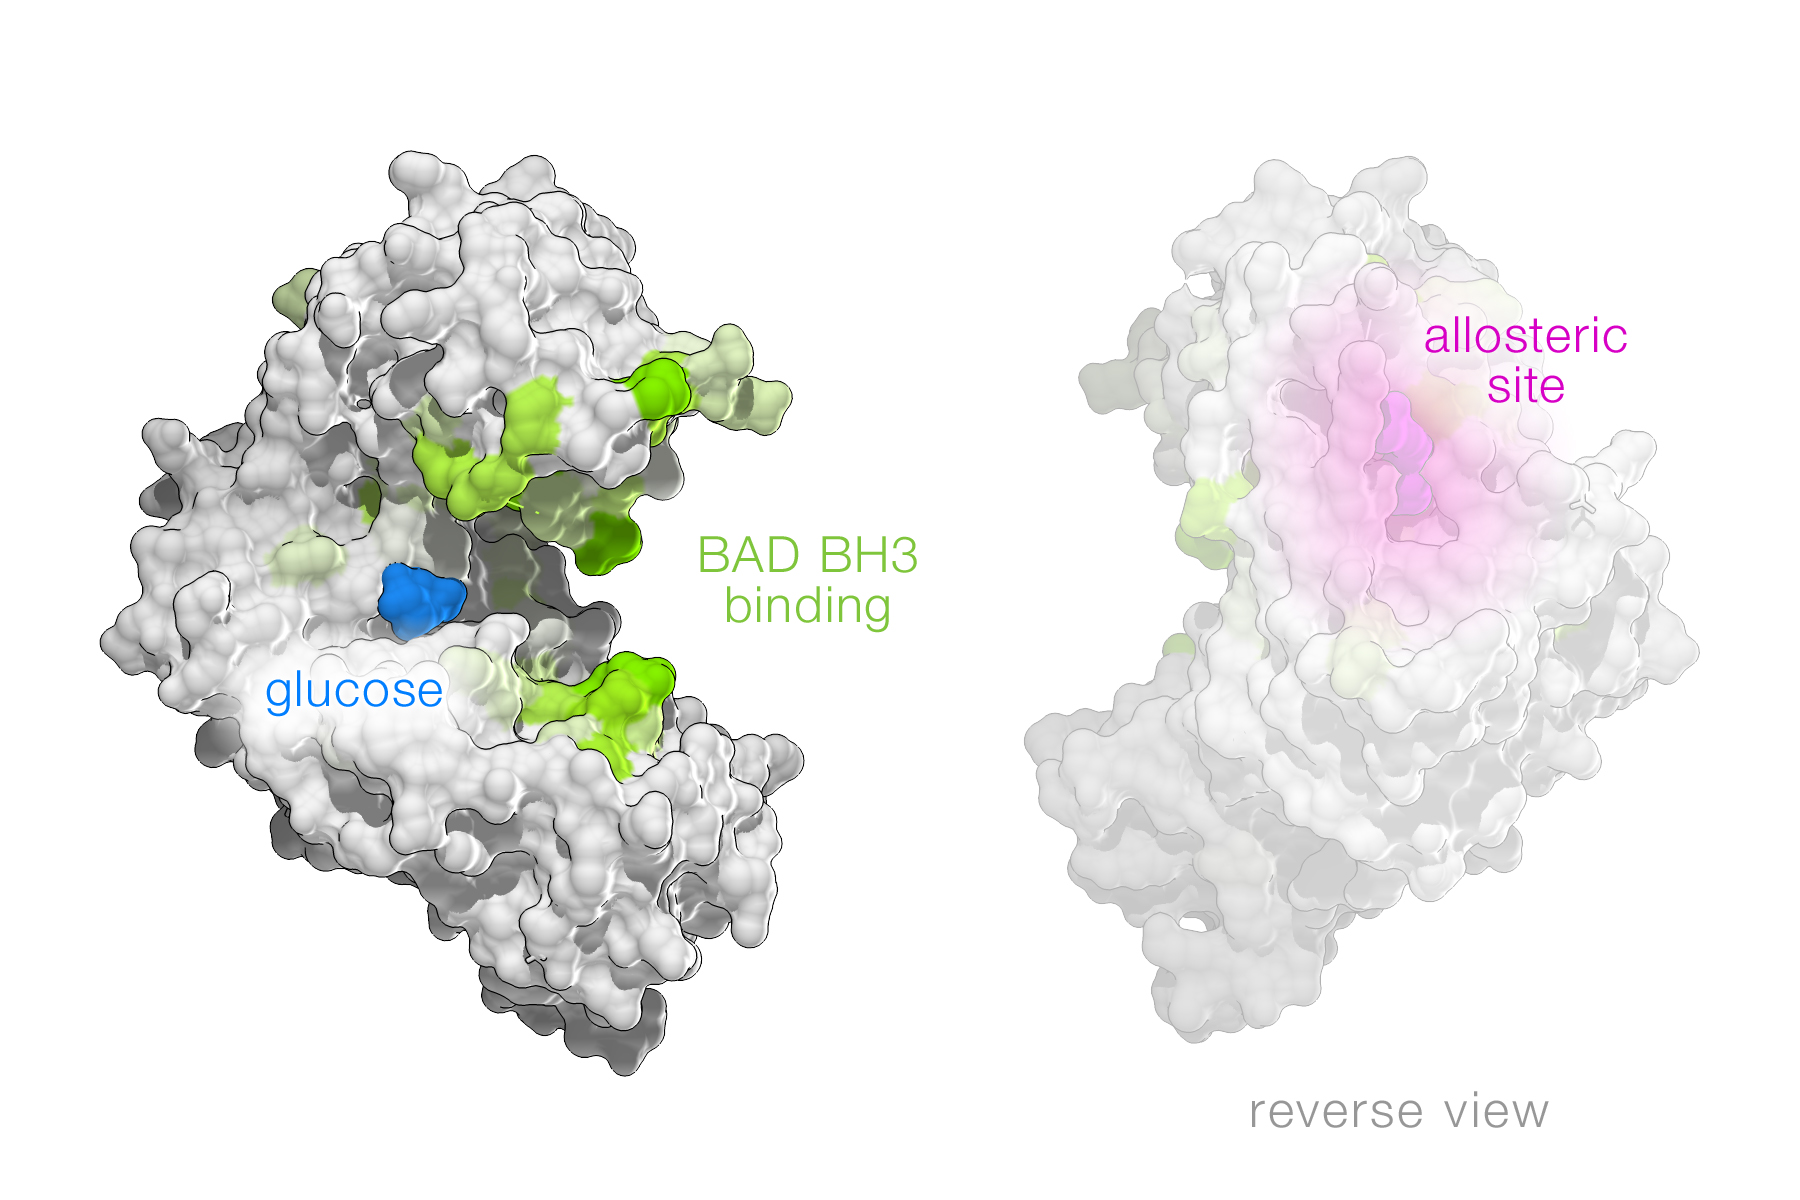 Graphic of glucose, BAD BH3 binding, and allosteric site